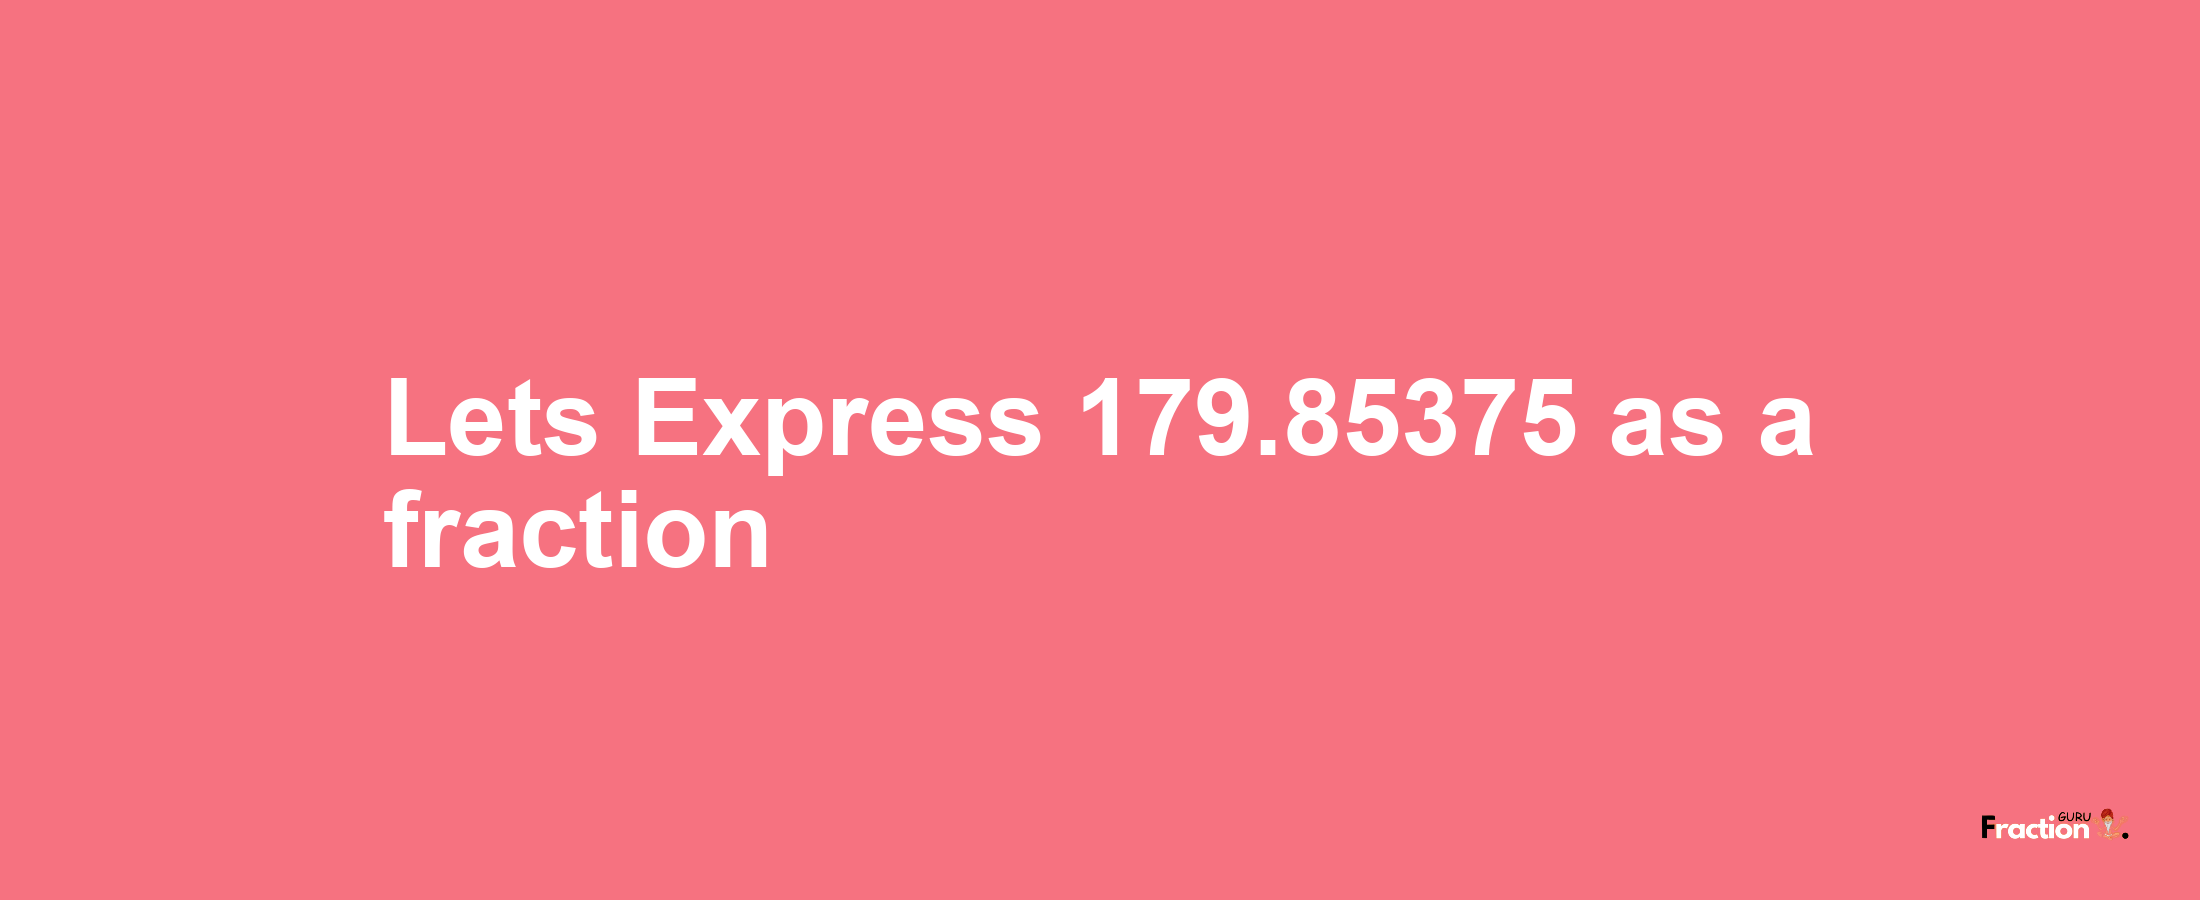 Lets Express 179.85375 as afraction